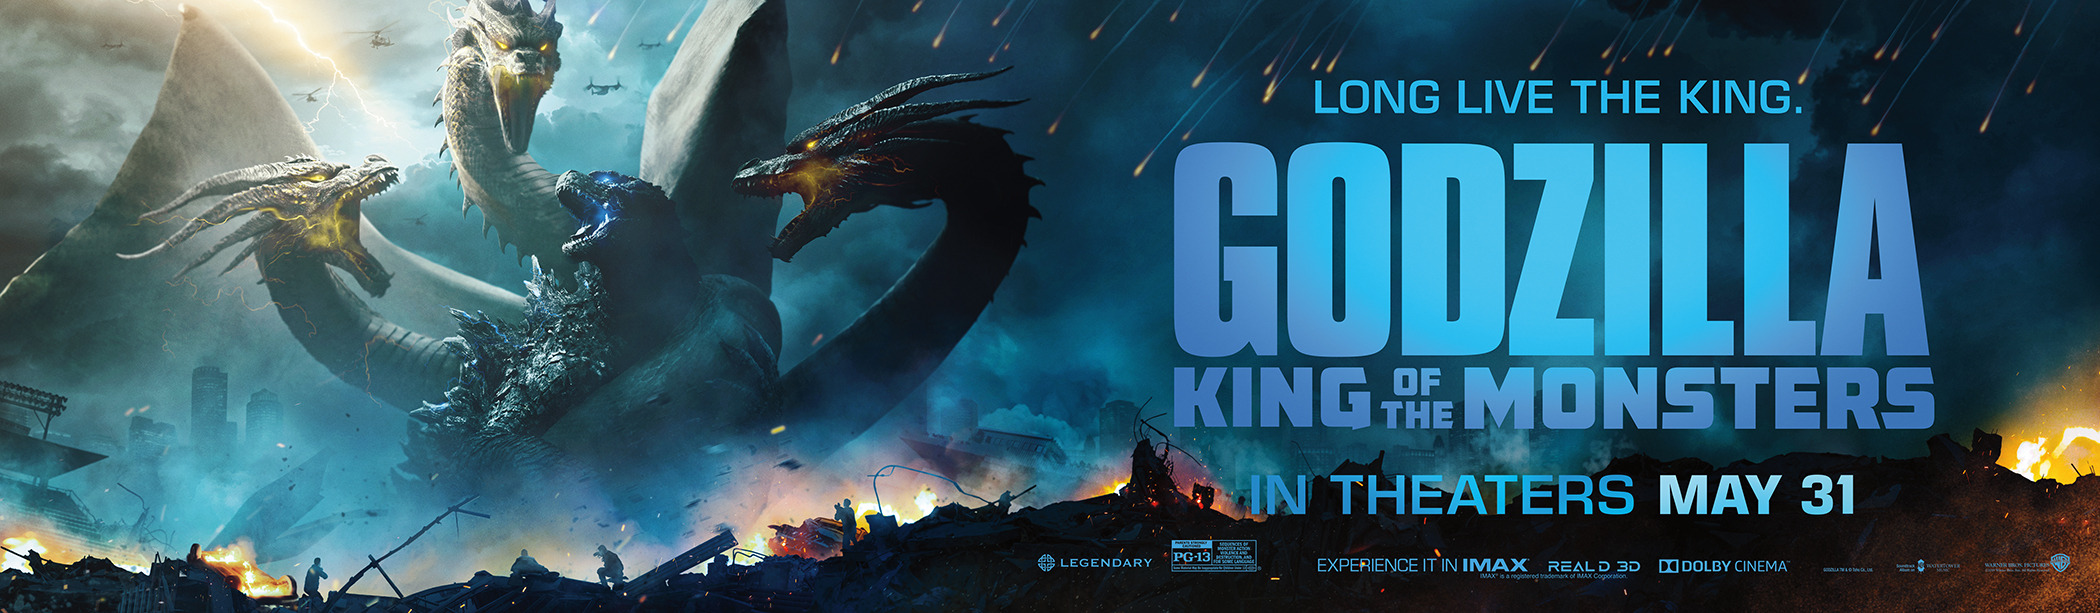 Mega Sized Movie Poster Image for Godzilla: King of the Monsters (#17 of 27)